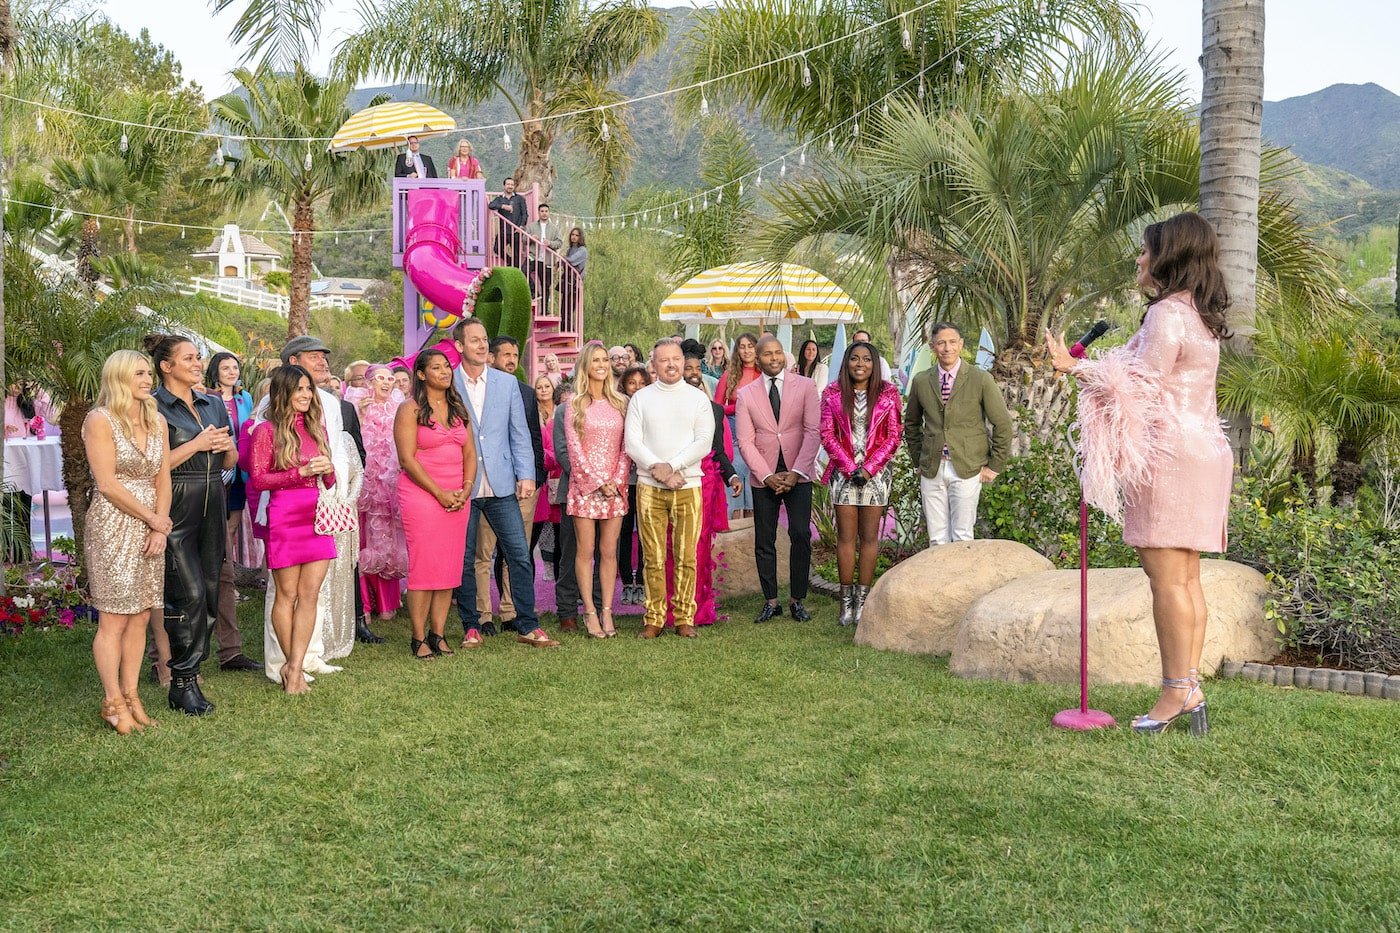 Everyone gathers for the Barbie Dreamhouse Challenge finale